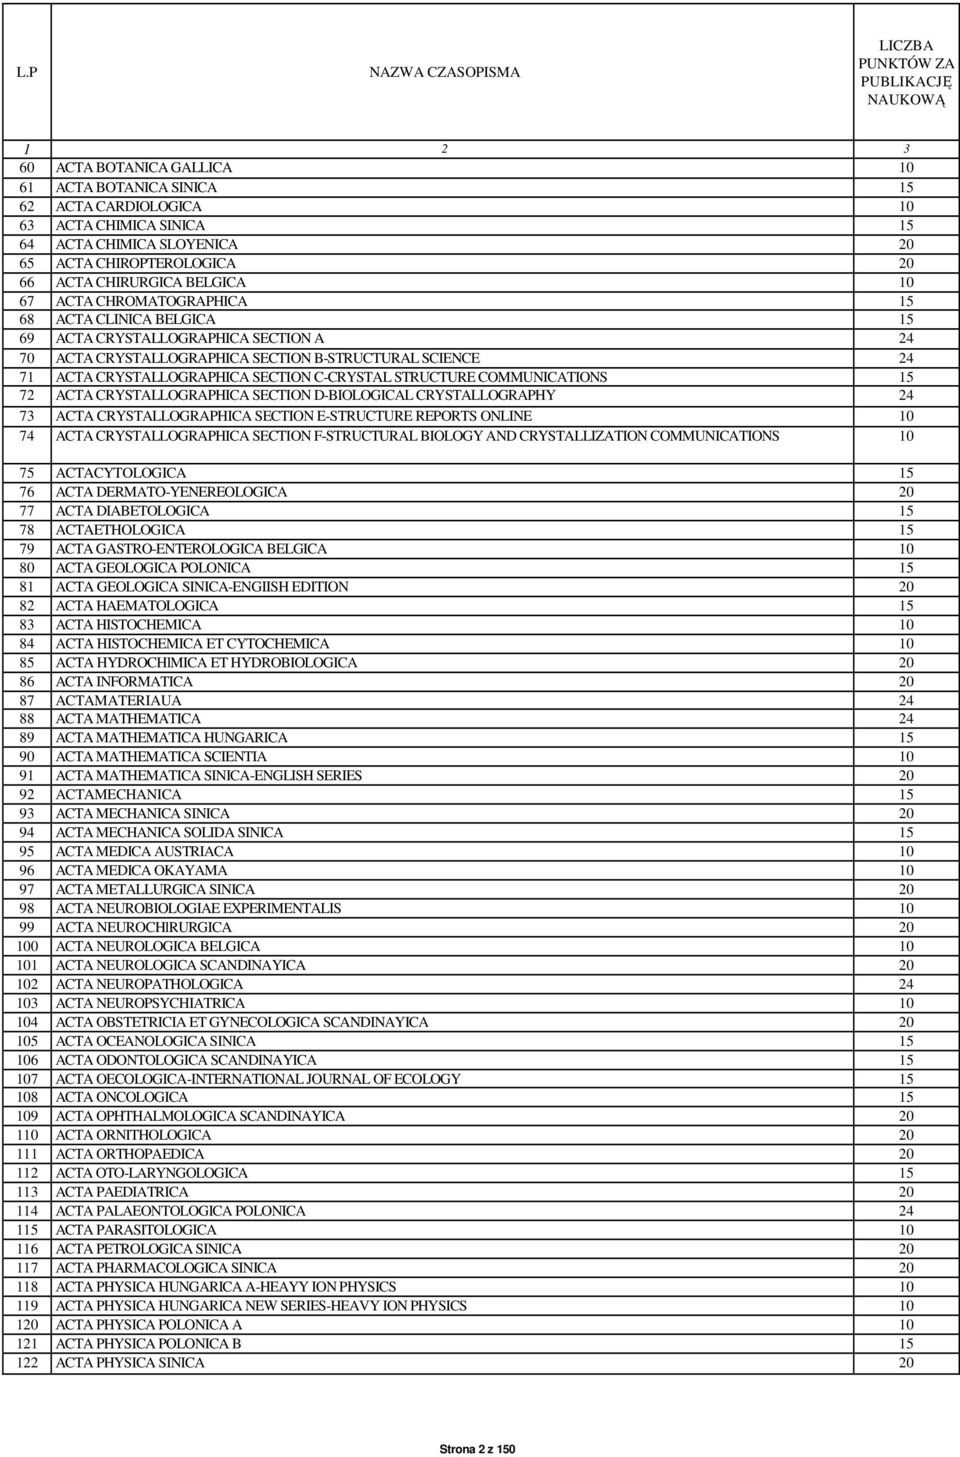 COMMUNICATIONS 15 72 ACTA CRYSTALLOGRAPHICA SECTION D-BIOLOGICAL CRYSTALLOGRAPHY 24 73 ACTA CRYSTALLOGRAPHICA SECTION E-STRUCTURE REPORTS ONLINE 10 74 ACTA CRYSTALLOGRAPHICA SECTION F-STRUCTURAL